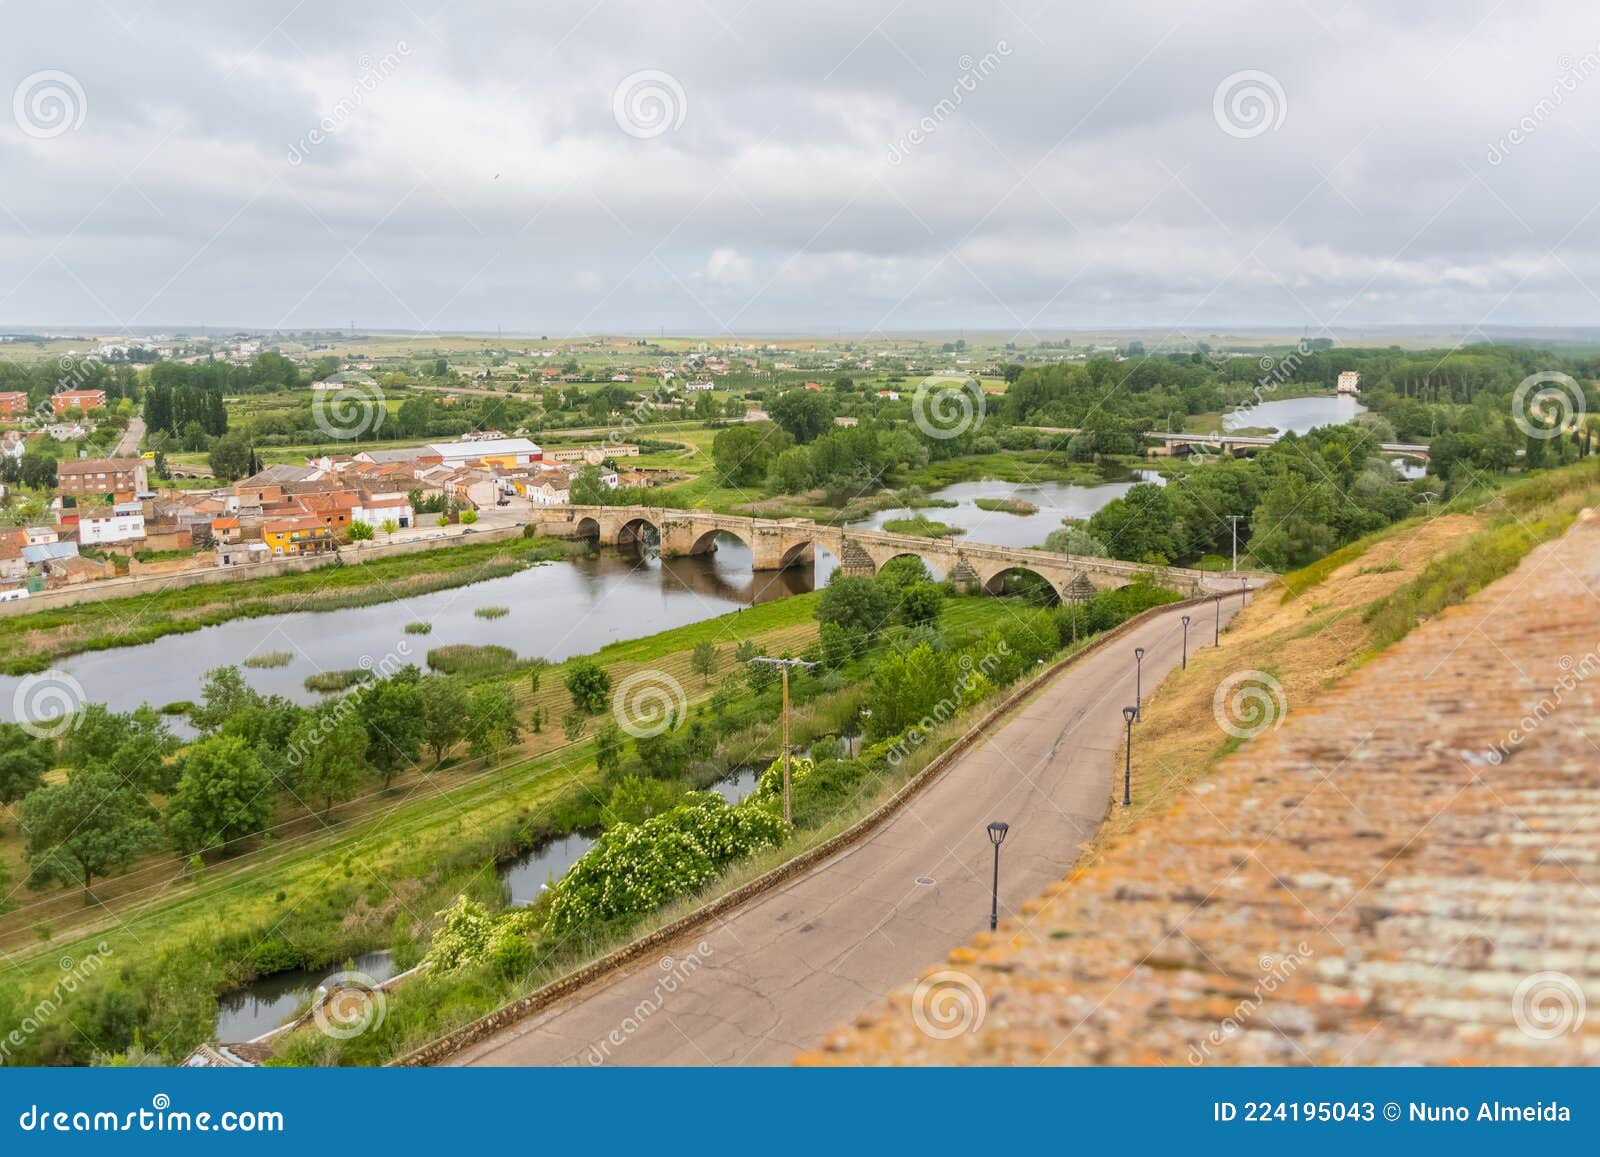 amazing view at the cuidad rodrigo city surrounding downtown, agueda river and natural landscape